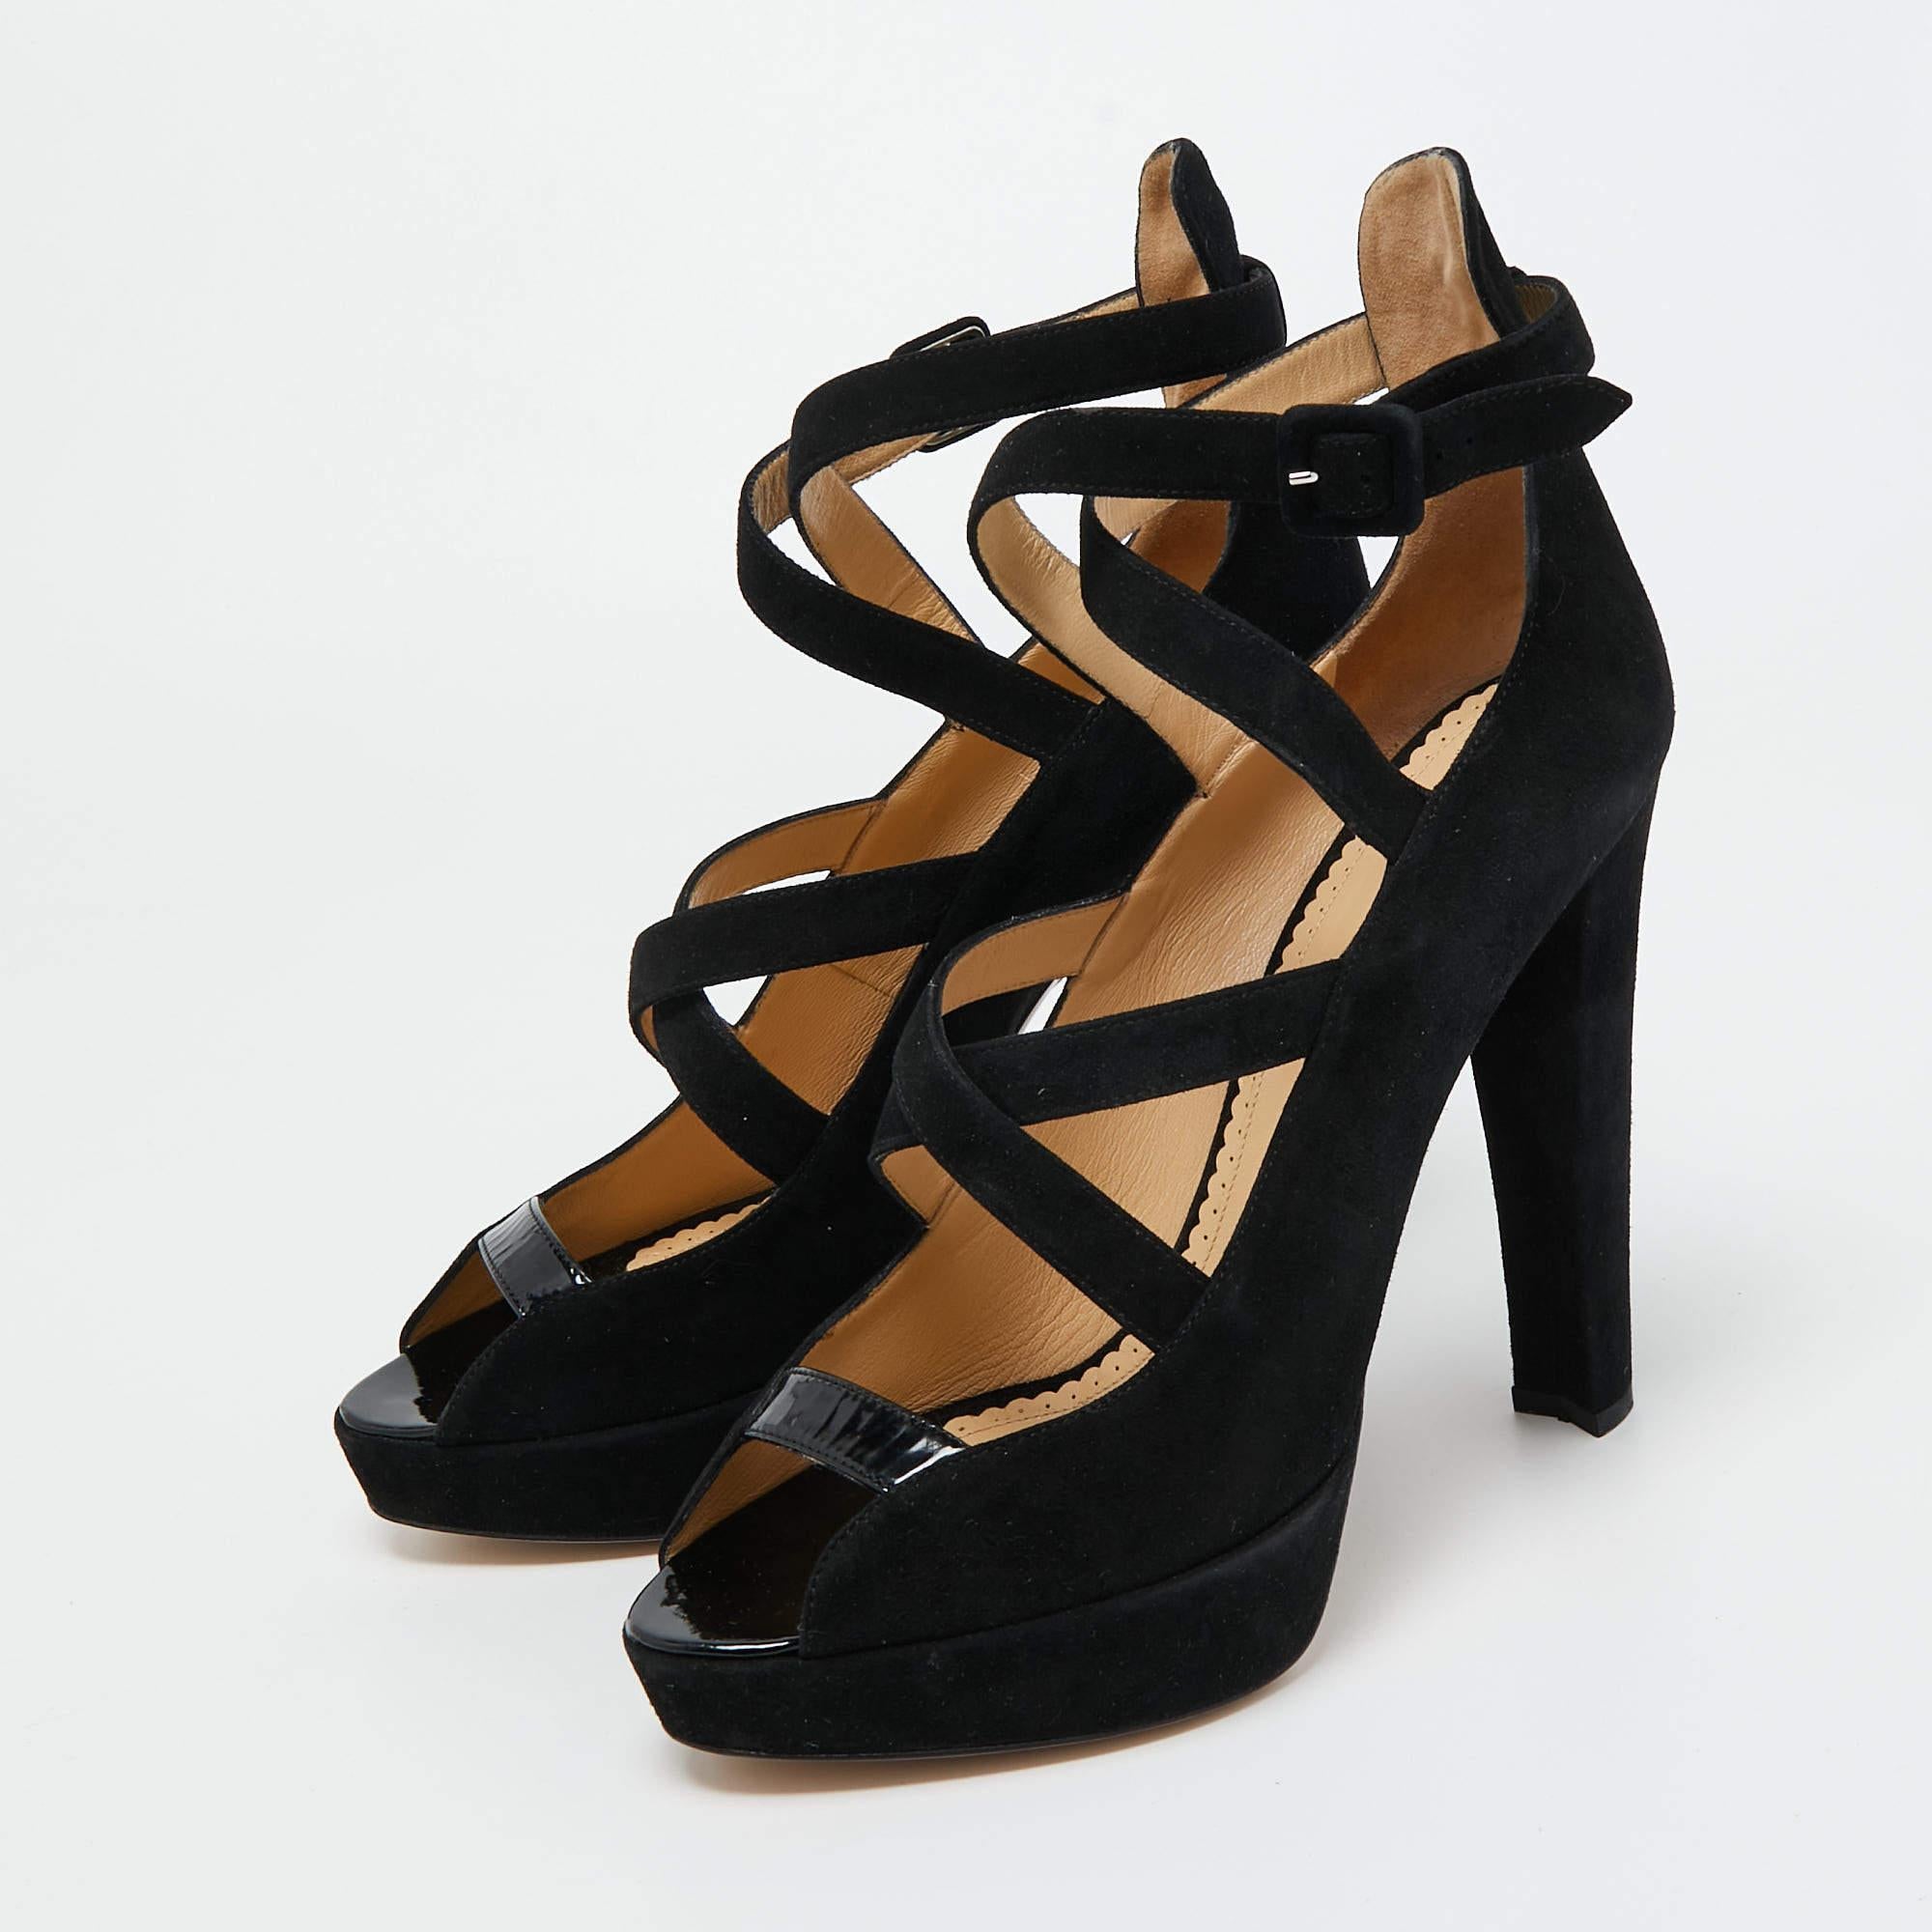 Elevate your ensemble with these Charlotte Olympia heels for women. Meticulously crafted, these exquisite heels combine luxury and comfort, creating a statement pair that's both fashionable and fabulous for every occasion.

